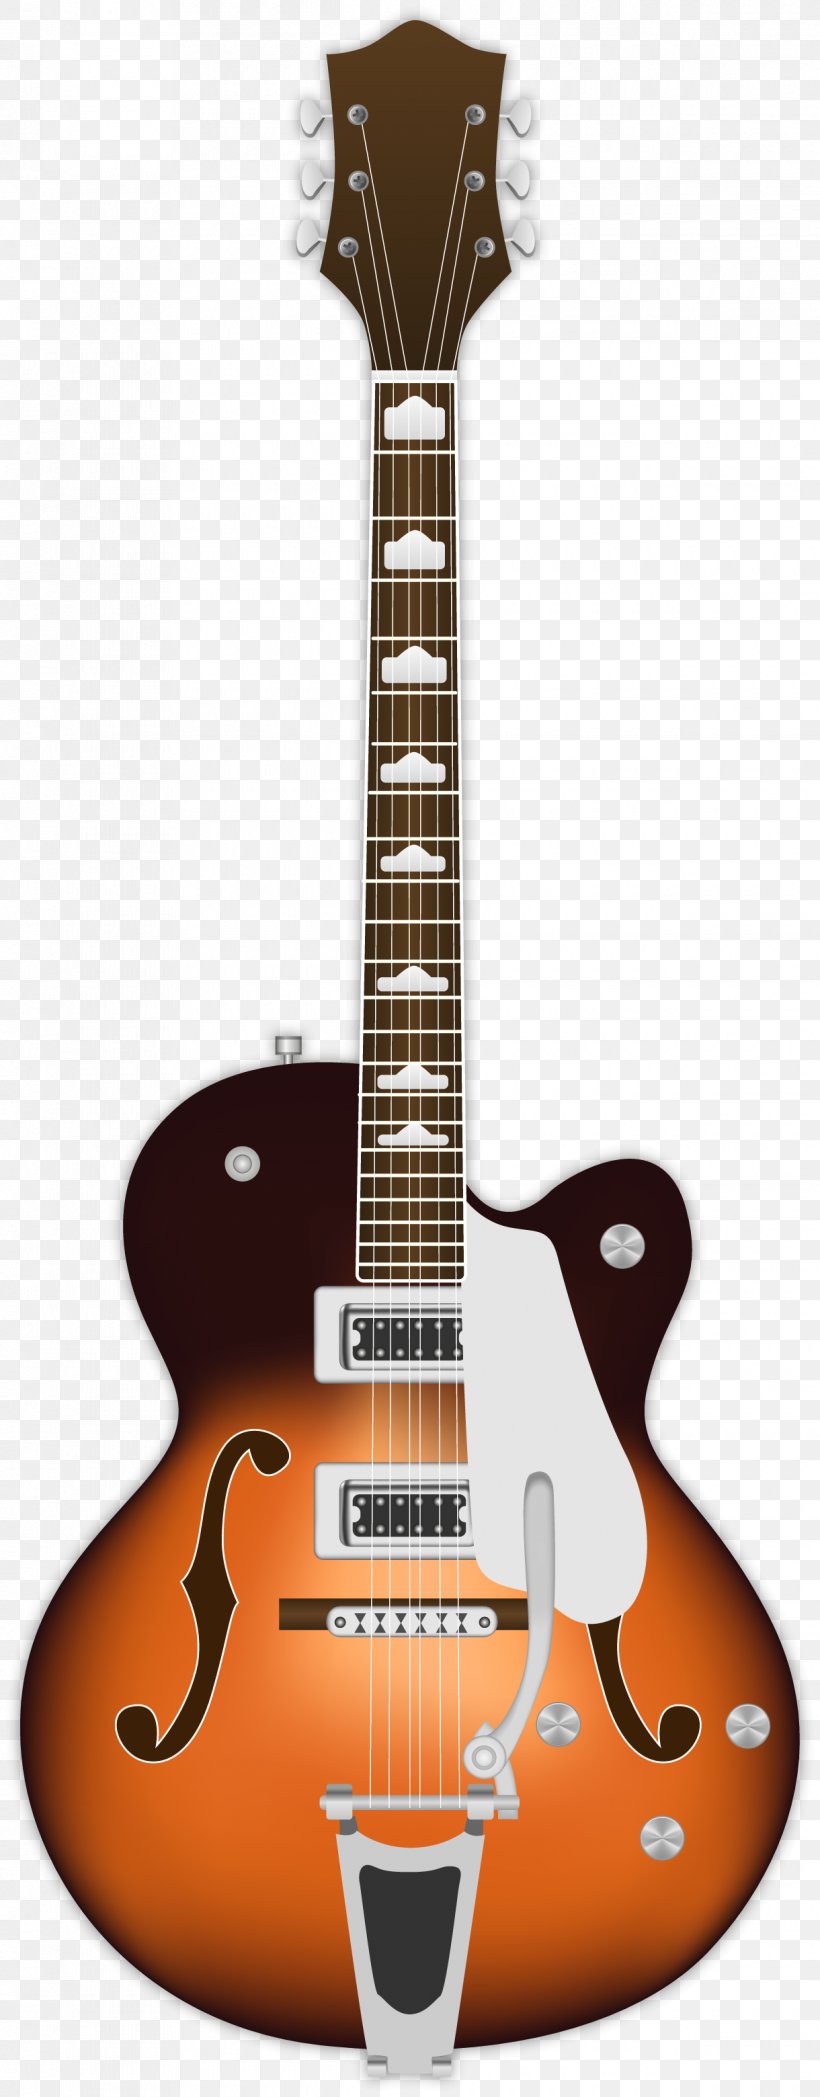 Twelve-string Guitar Gretsch Electric Guitar Semi-acoustic Guitar, PNG, 1220x3120px, Twelvestring Guitar, Acoustic Electric Guitar, Acoustic Guitar, Archtop Guitar, Bigsby Vibrato Tailpiece Download Free